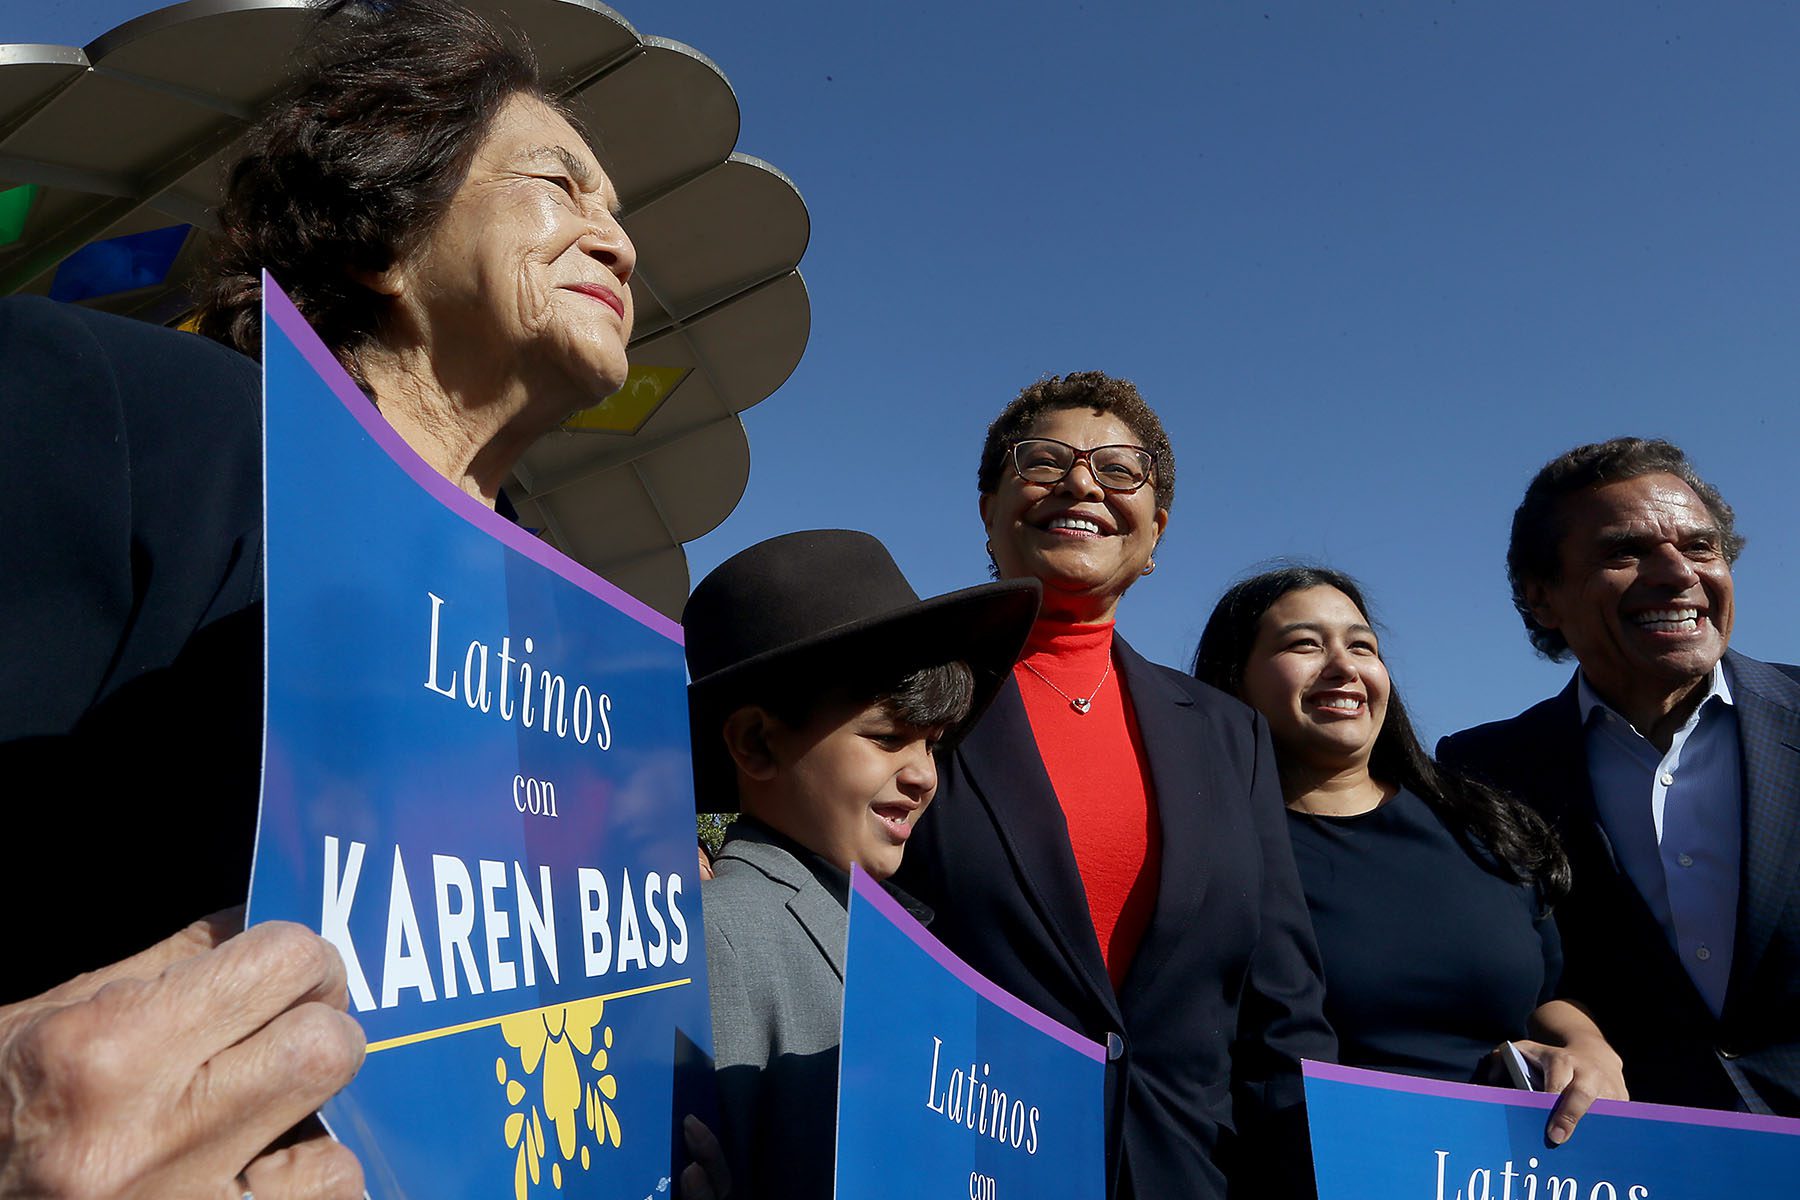 Karen Bass, her grandchildren, Dolores Huerta and Antonio Villaraigosa pose for a picture together at a campaign event. Huerta and Bass' grandchildren hold signs that reads "Latinos con Karen Bass."